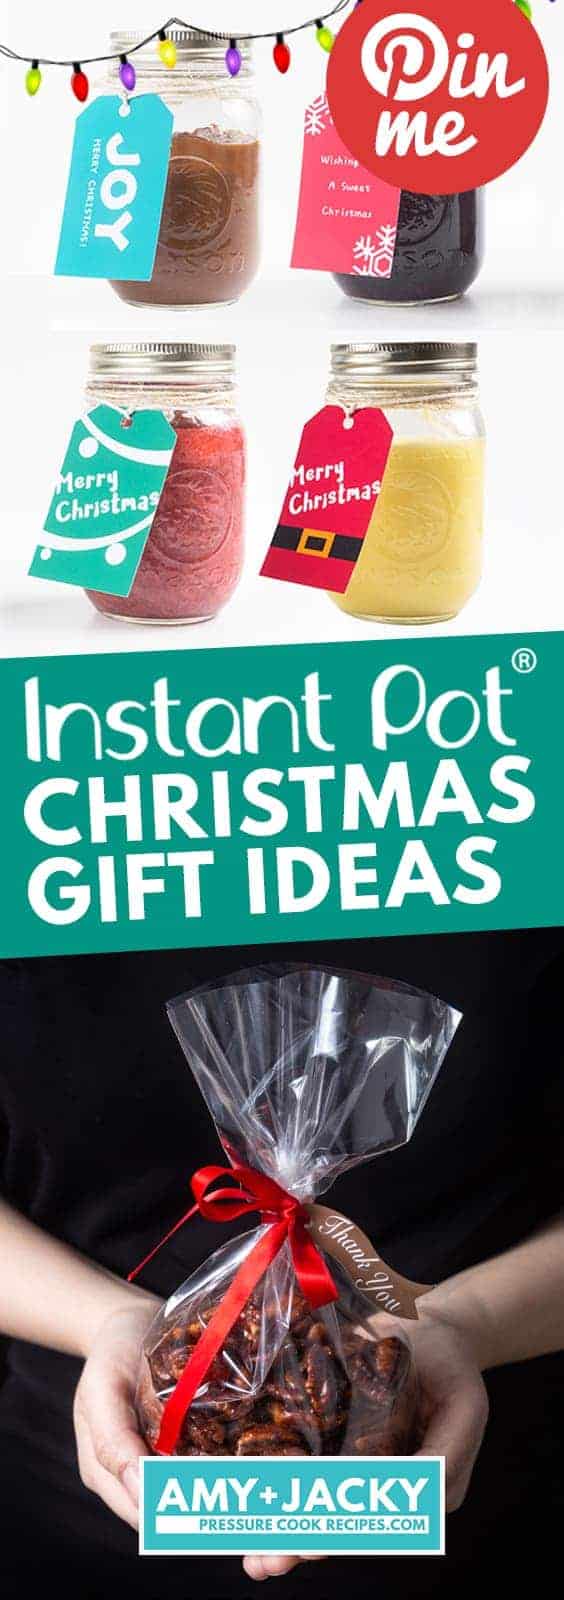 Instant Pot Homemade Food Gifts | Pressure Cooker Christmas Recipes | DIY Gifts | Holiday Food Gifts | DIY Christmas Gifts | Edible Gifts | Teacher's Gifts | Gift Exchange Ideas | Stocking Stuffers #instantpot #pressurecooker #diy #food #recipes #christmas #holiday #gifts